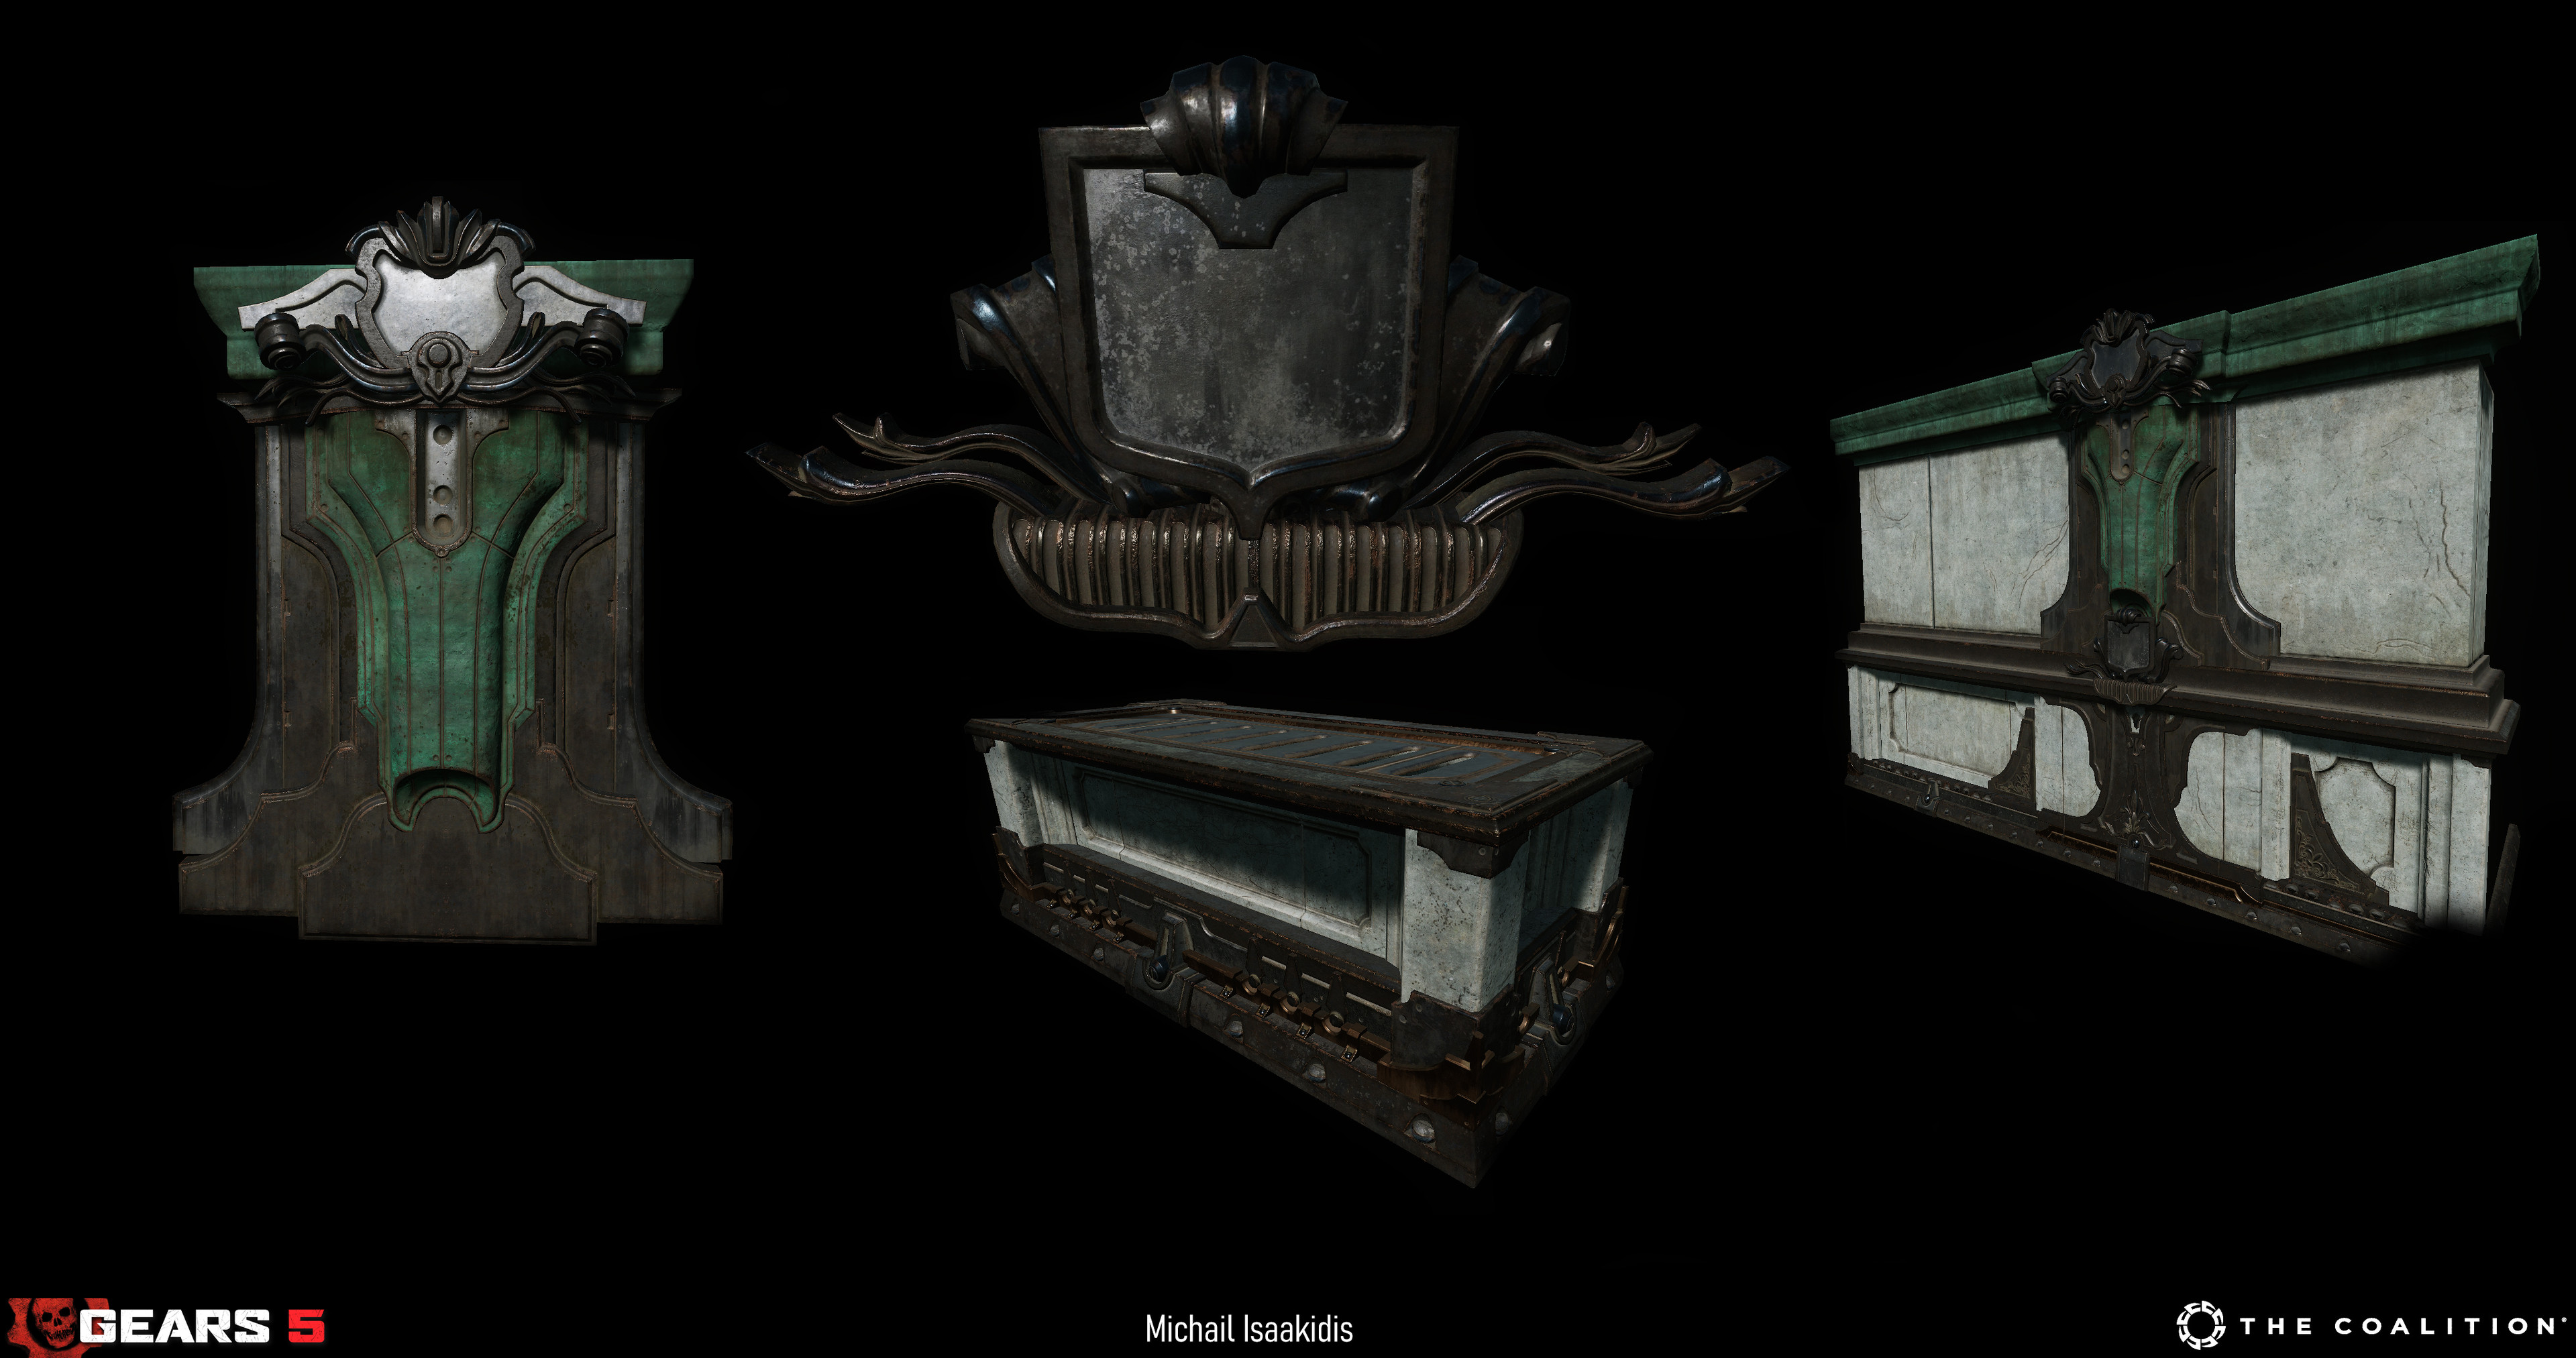 Theses assets utilise a combination of unique bake materials and trim sheets. 
Overall a total of 4 materials were created to populate the majority of the walls and covers in the map. 